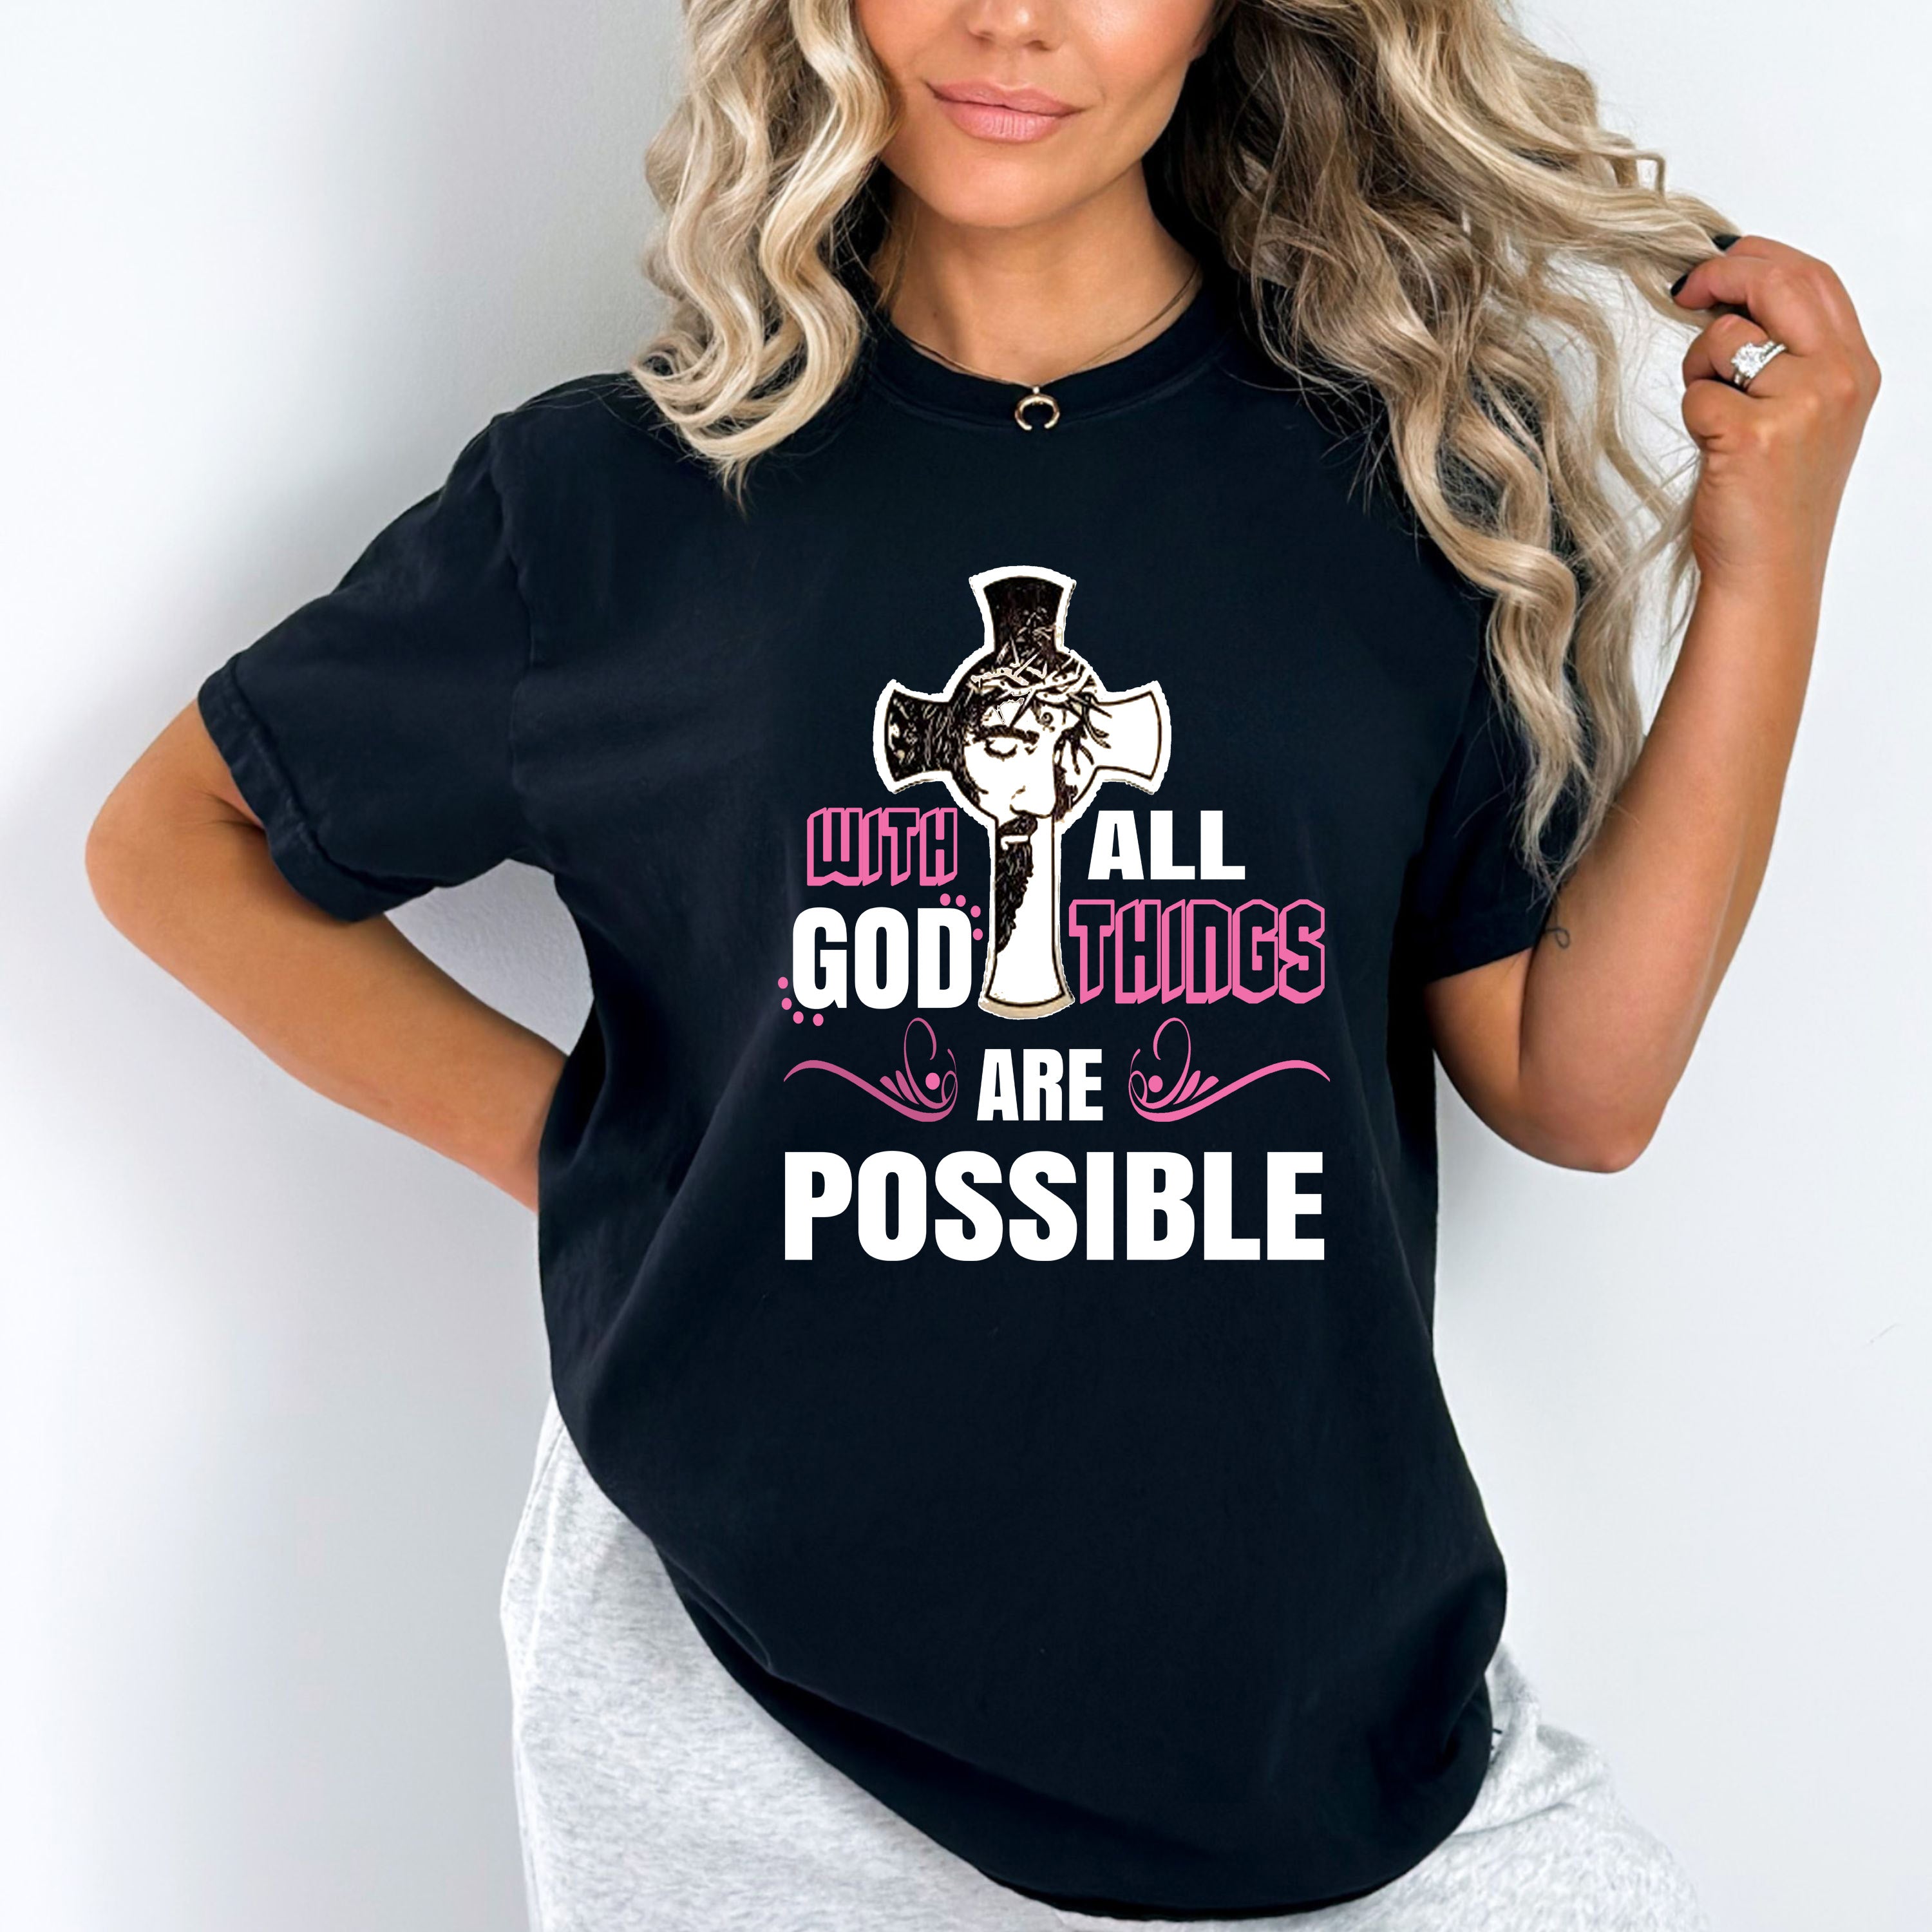 "WITH GOD ALL THINGS ARE POSSIBLE", T-SHIRT.